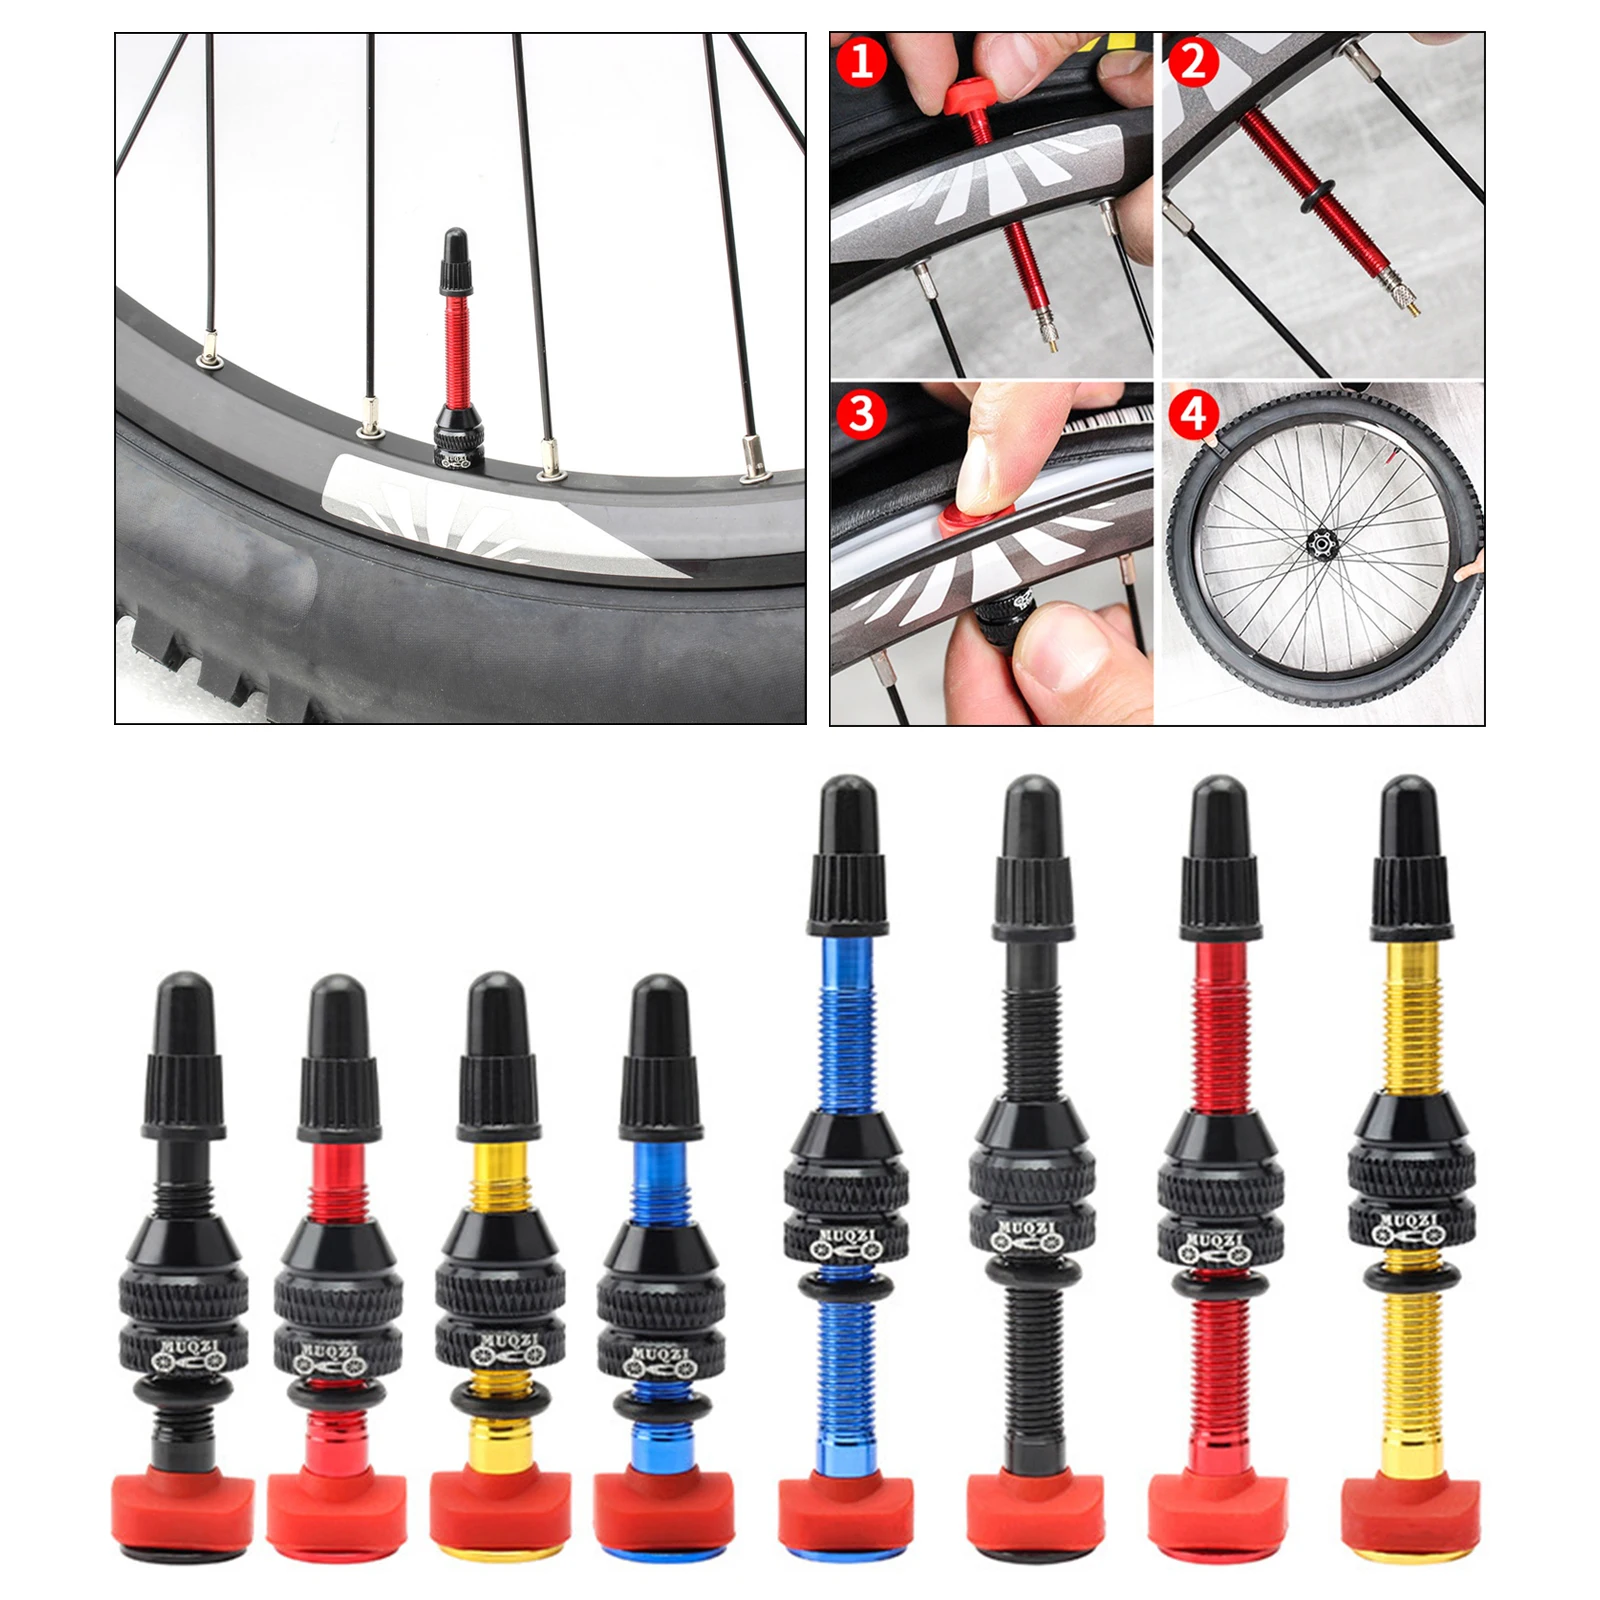 Bicycle 40/60mm Presta Valve for Road MTB Bicycle Tubeless Tires Brass Core Alloy Stem